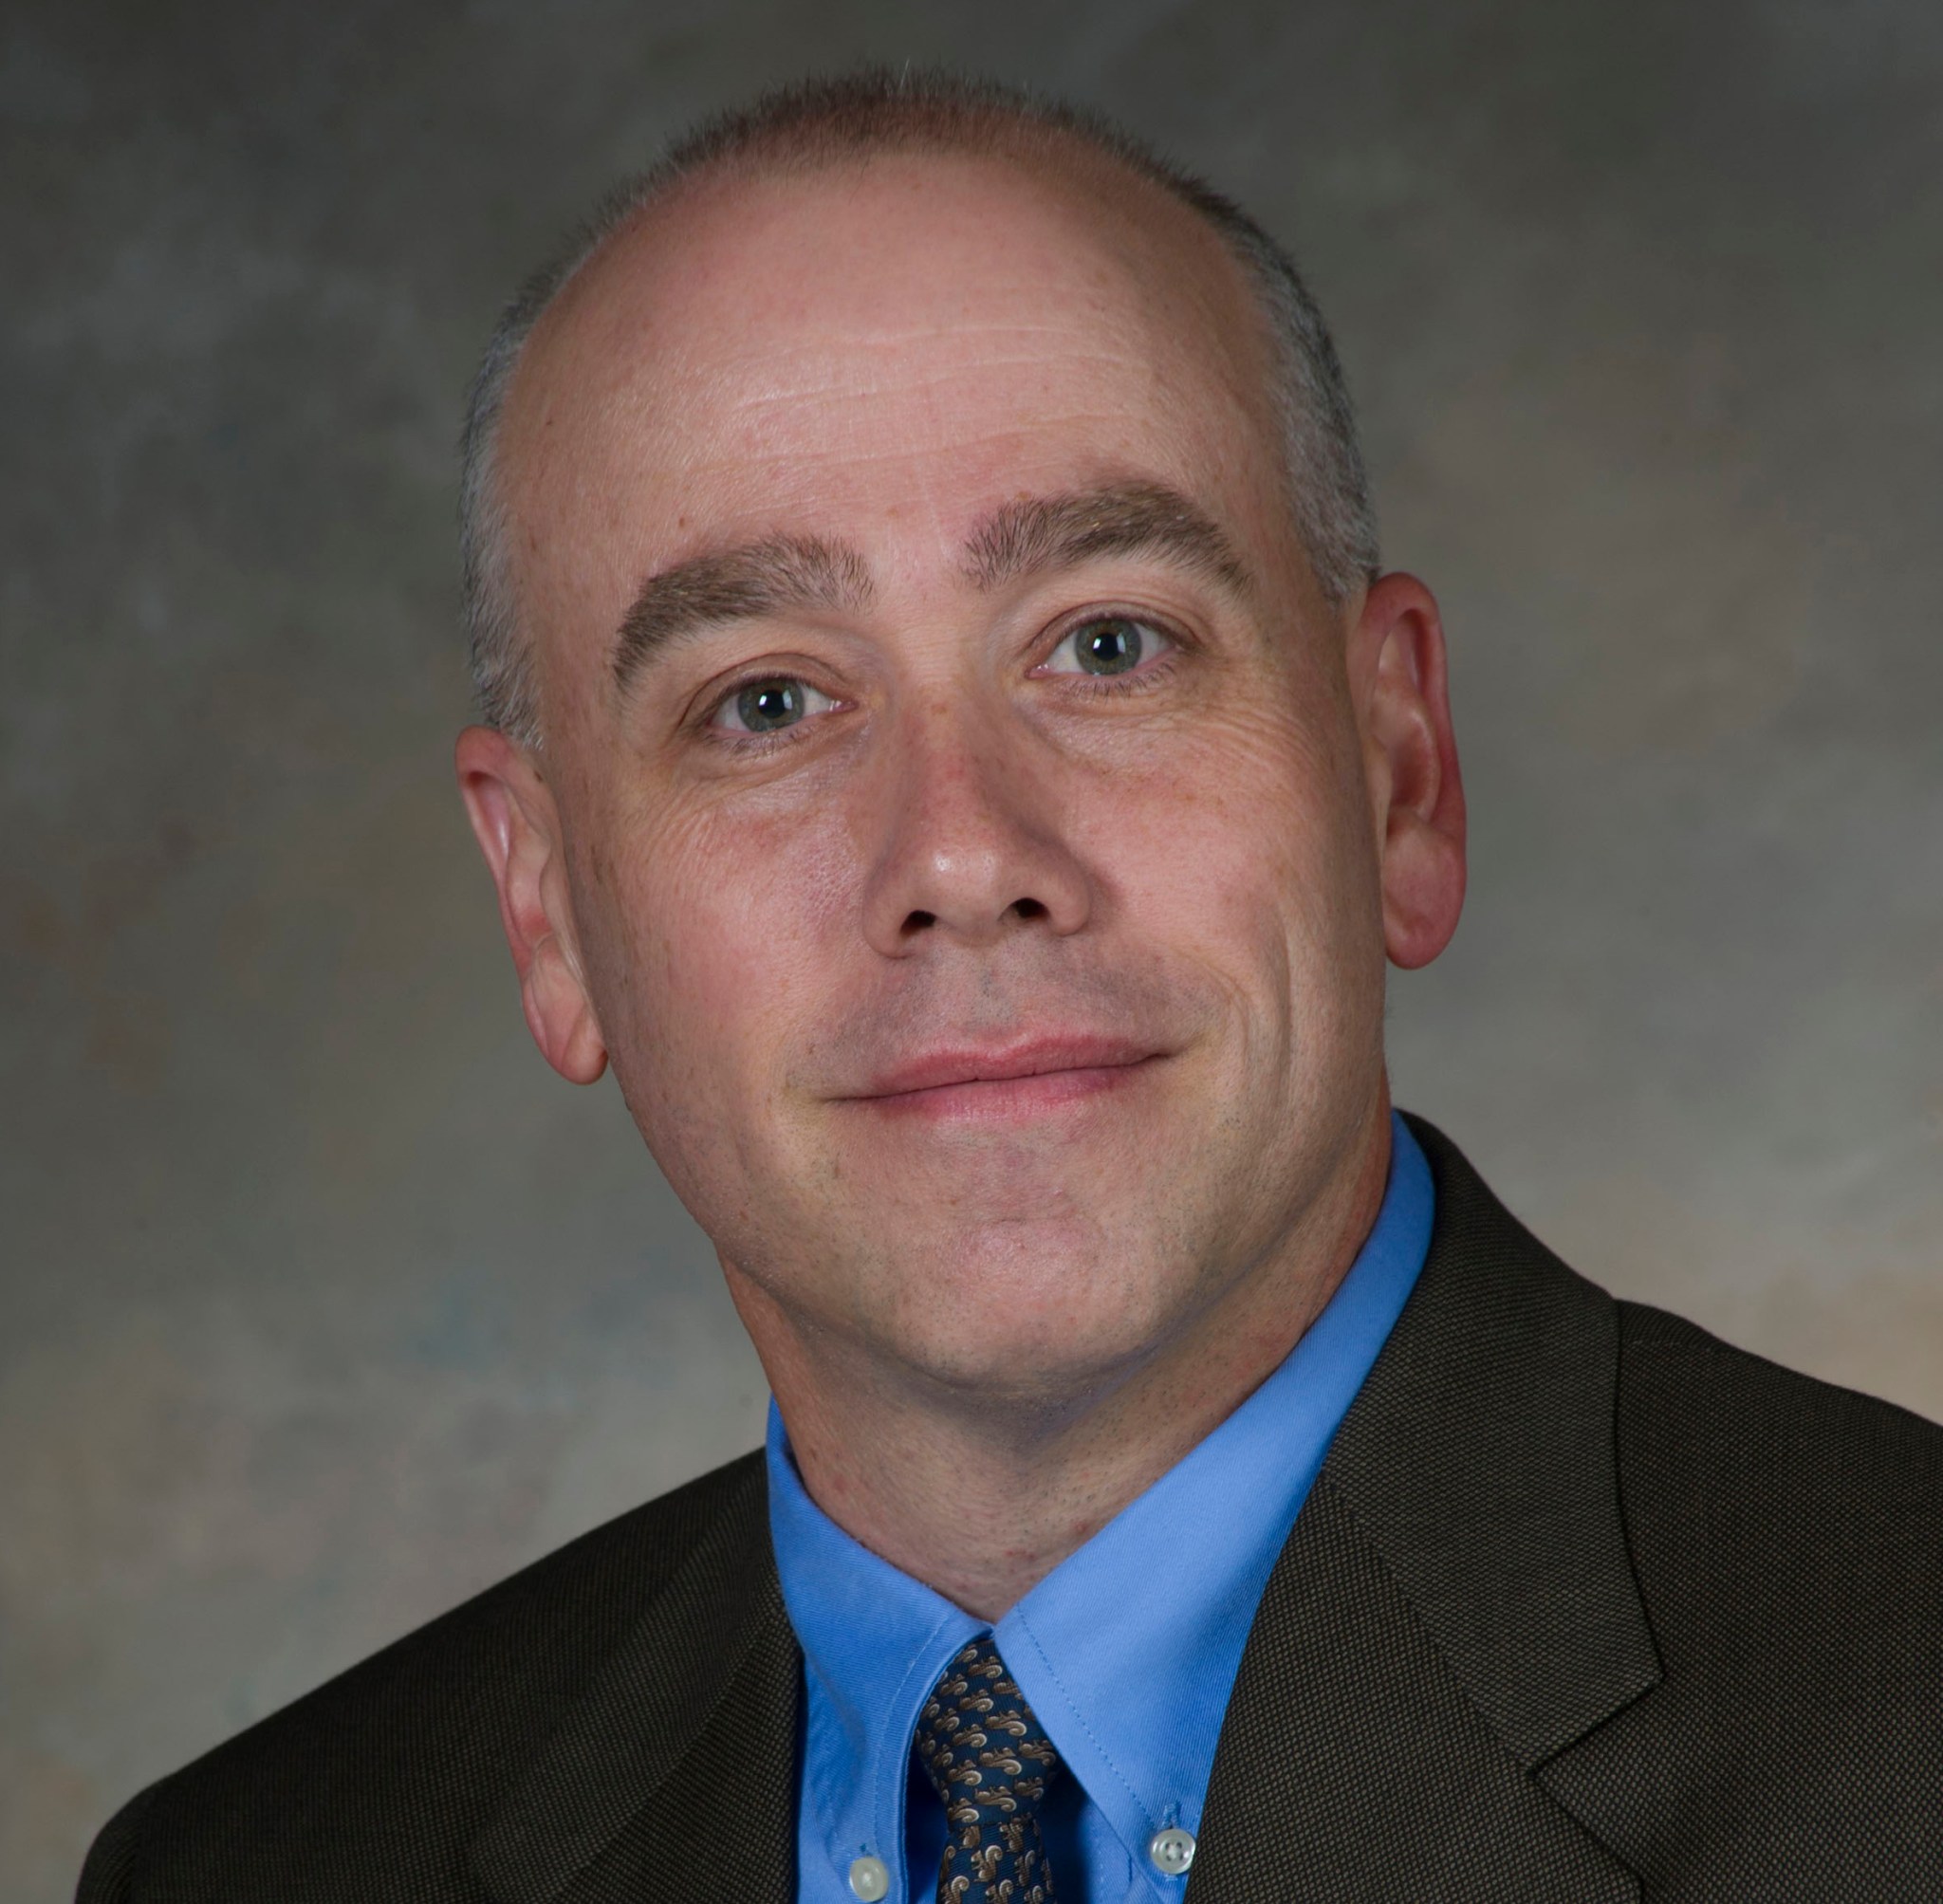 Chad Summers has been named as the director of the Test Laboratory for the Engineering Directorate at NASA’s Marshall Space Flight Center, effective April 21.